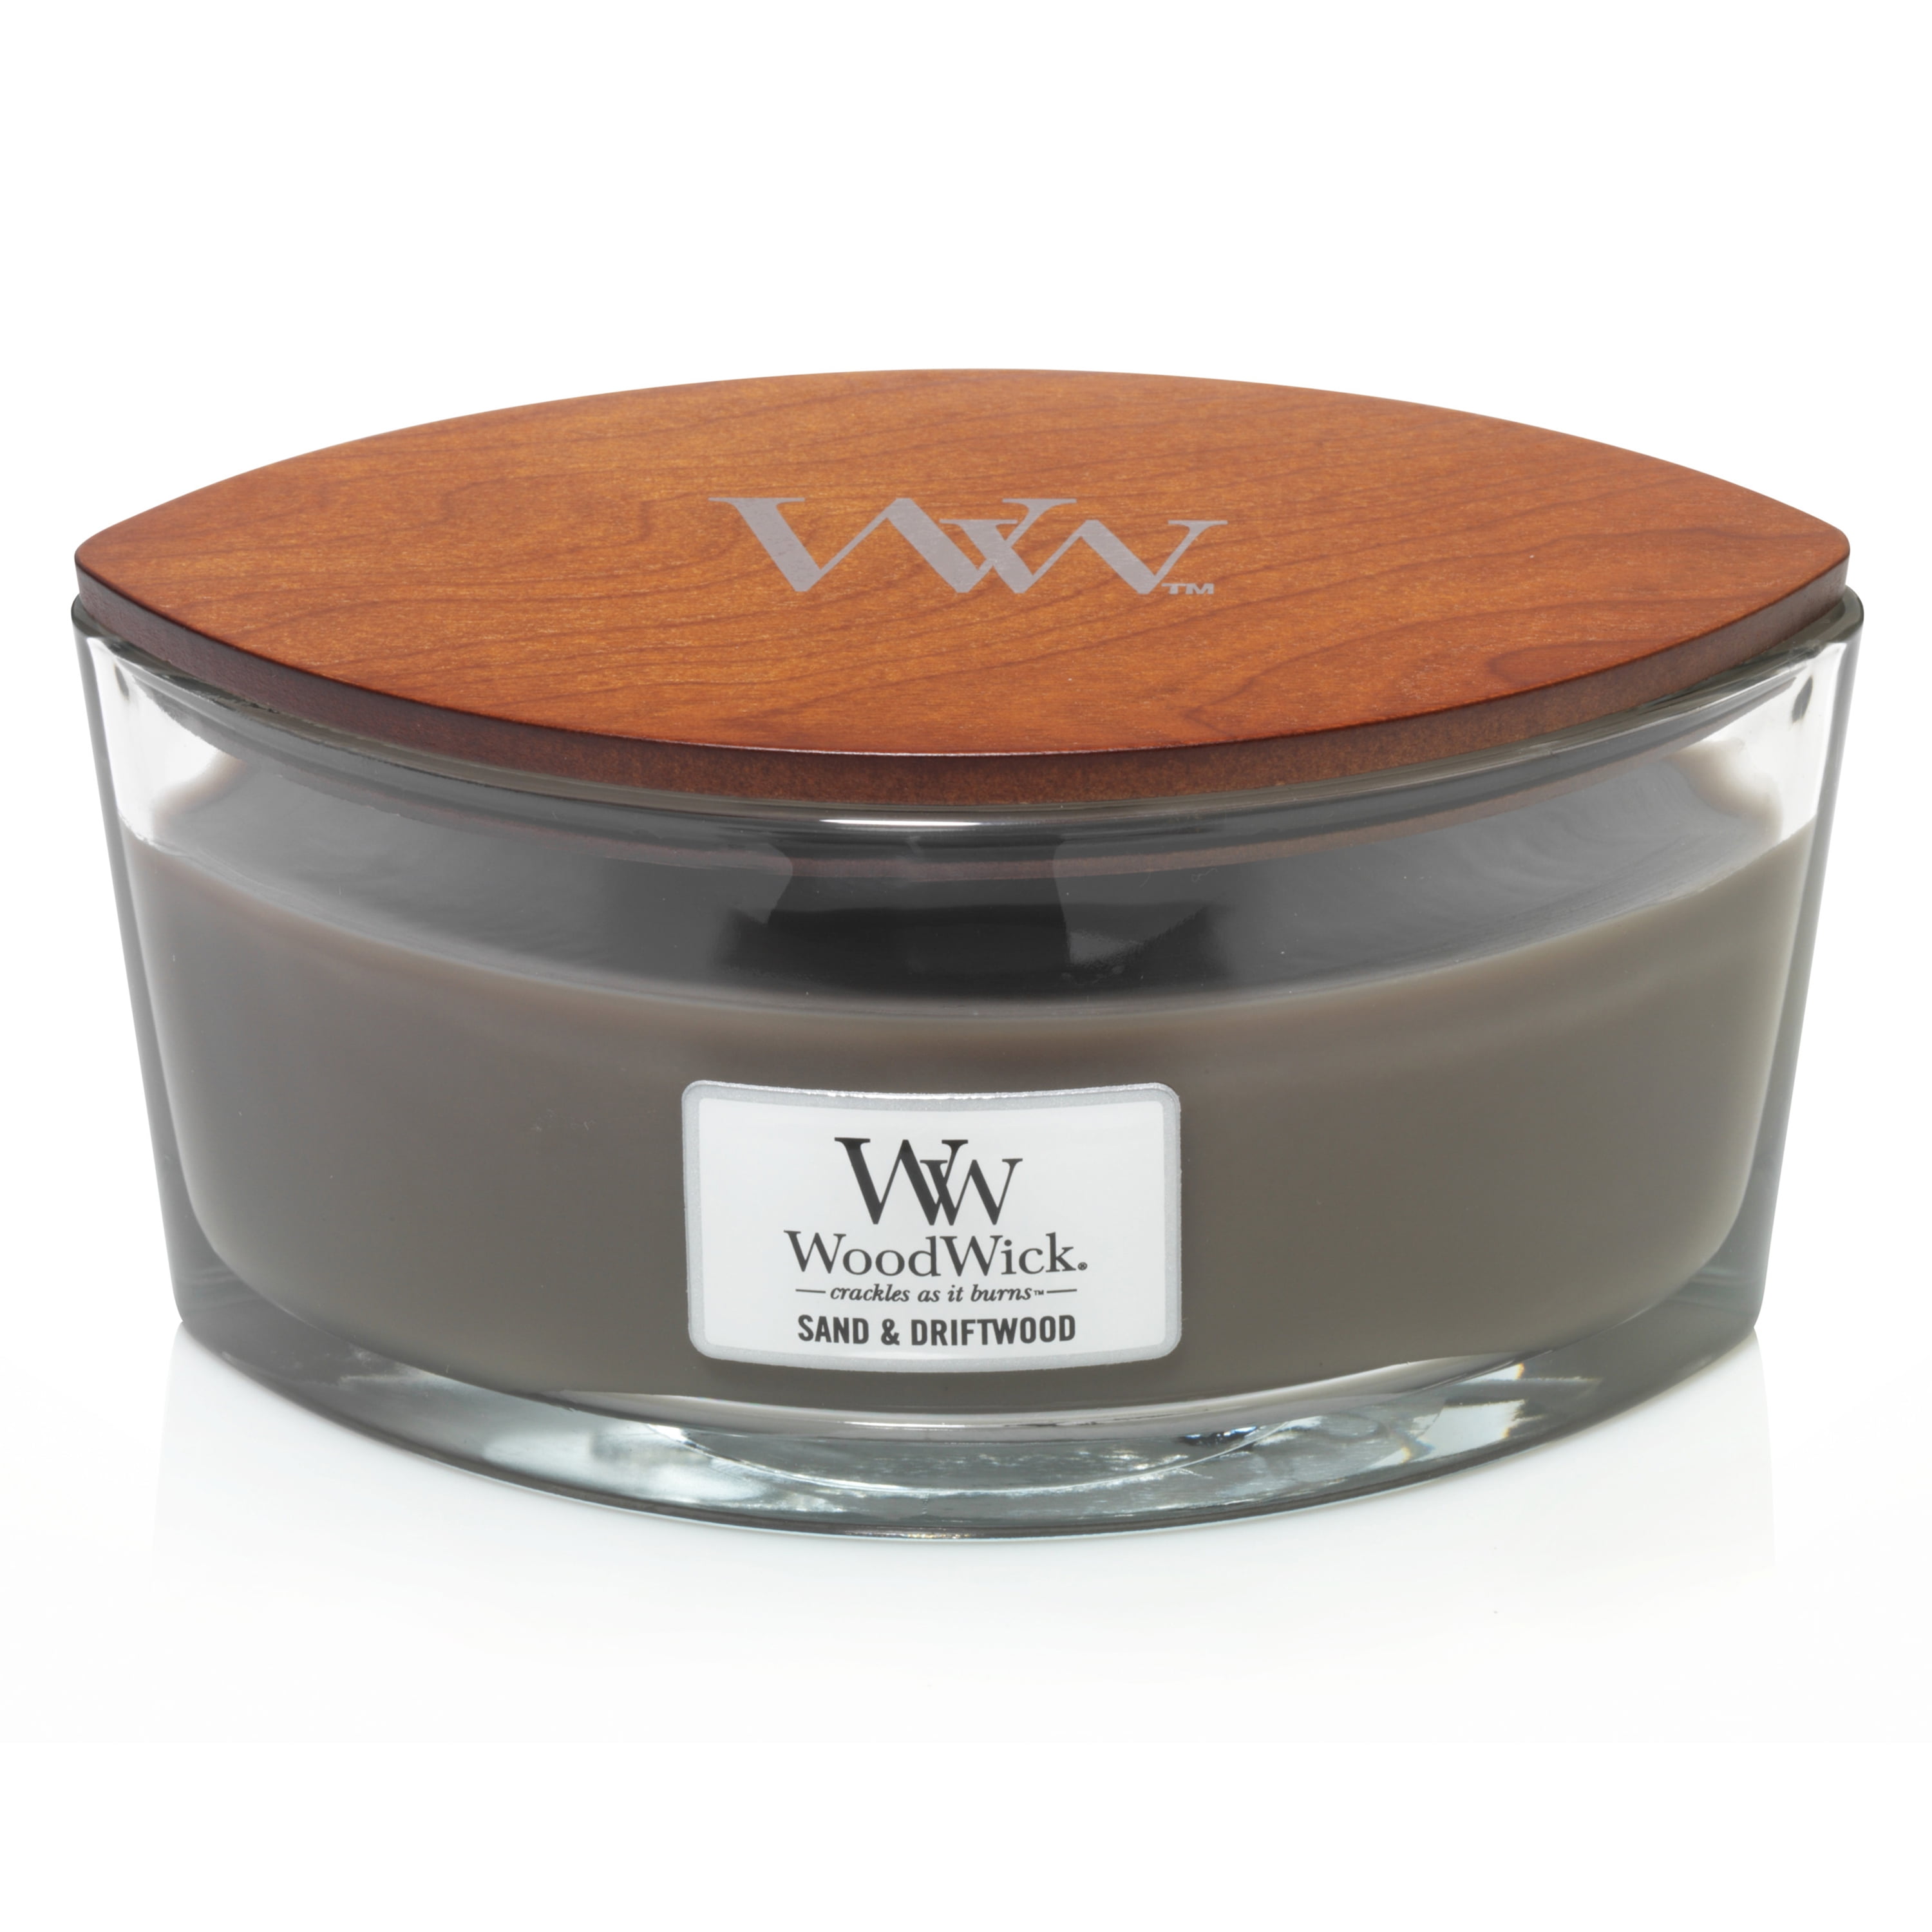 WOODWICK MEDIUM 12cm SOY WAX CANDLE Sand & Driftwood **FREE DELIVERY** 